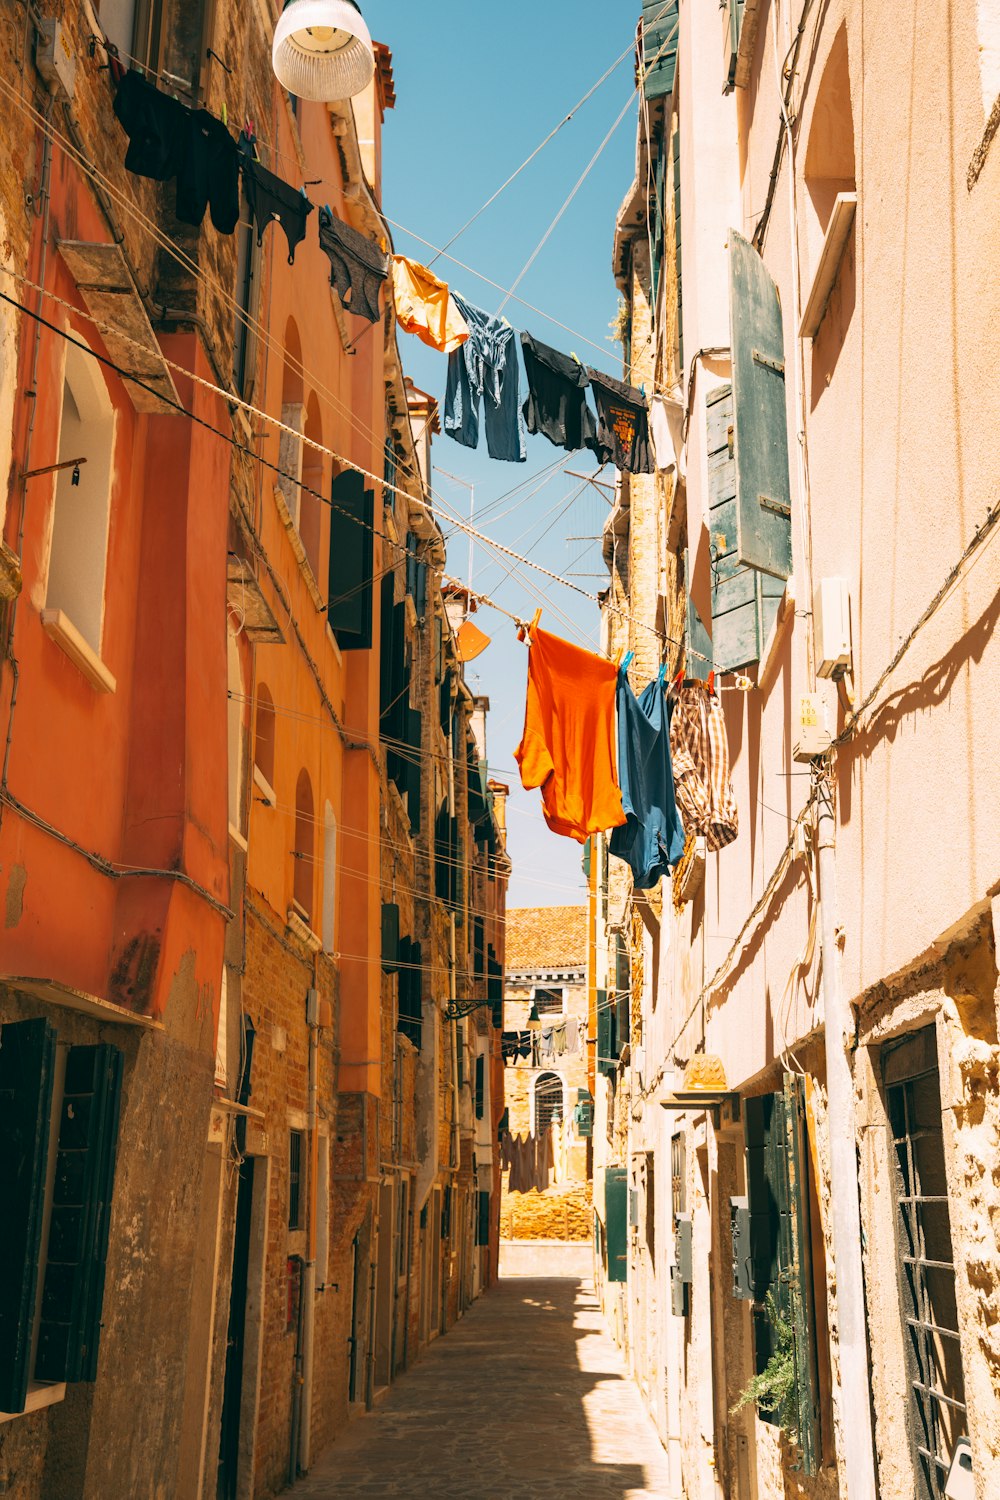 a narrow alley way with clothes hanging on a line